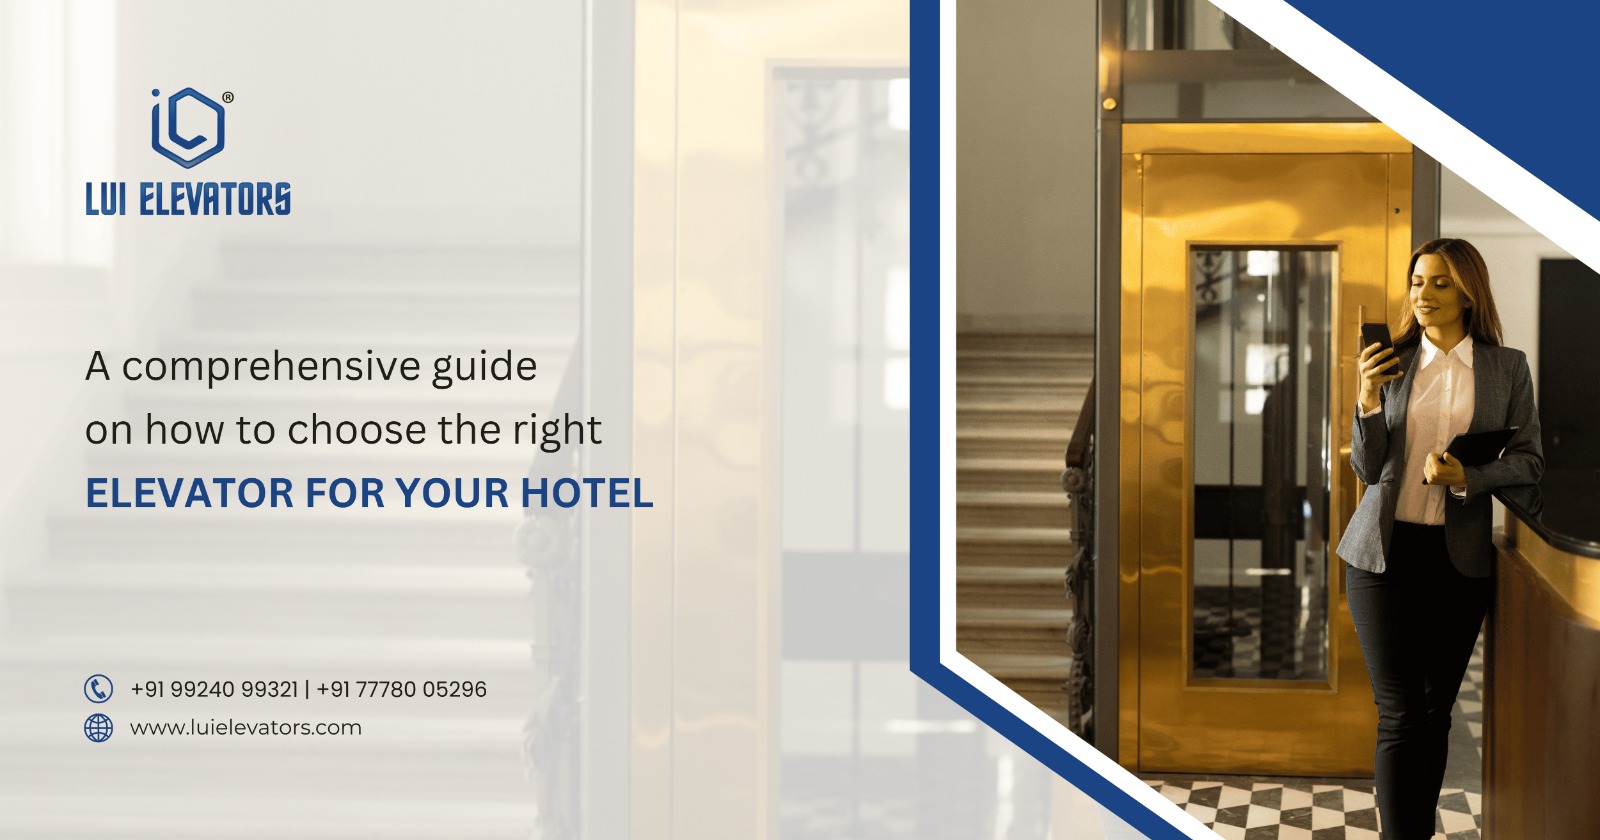 A comprehensive guide on how to choose the right elevator for your hotel